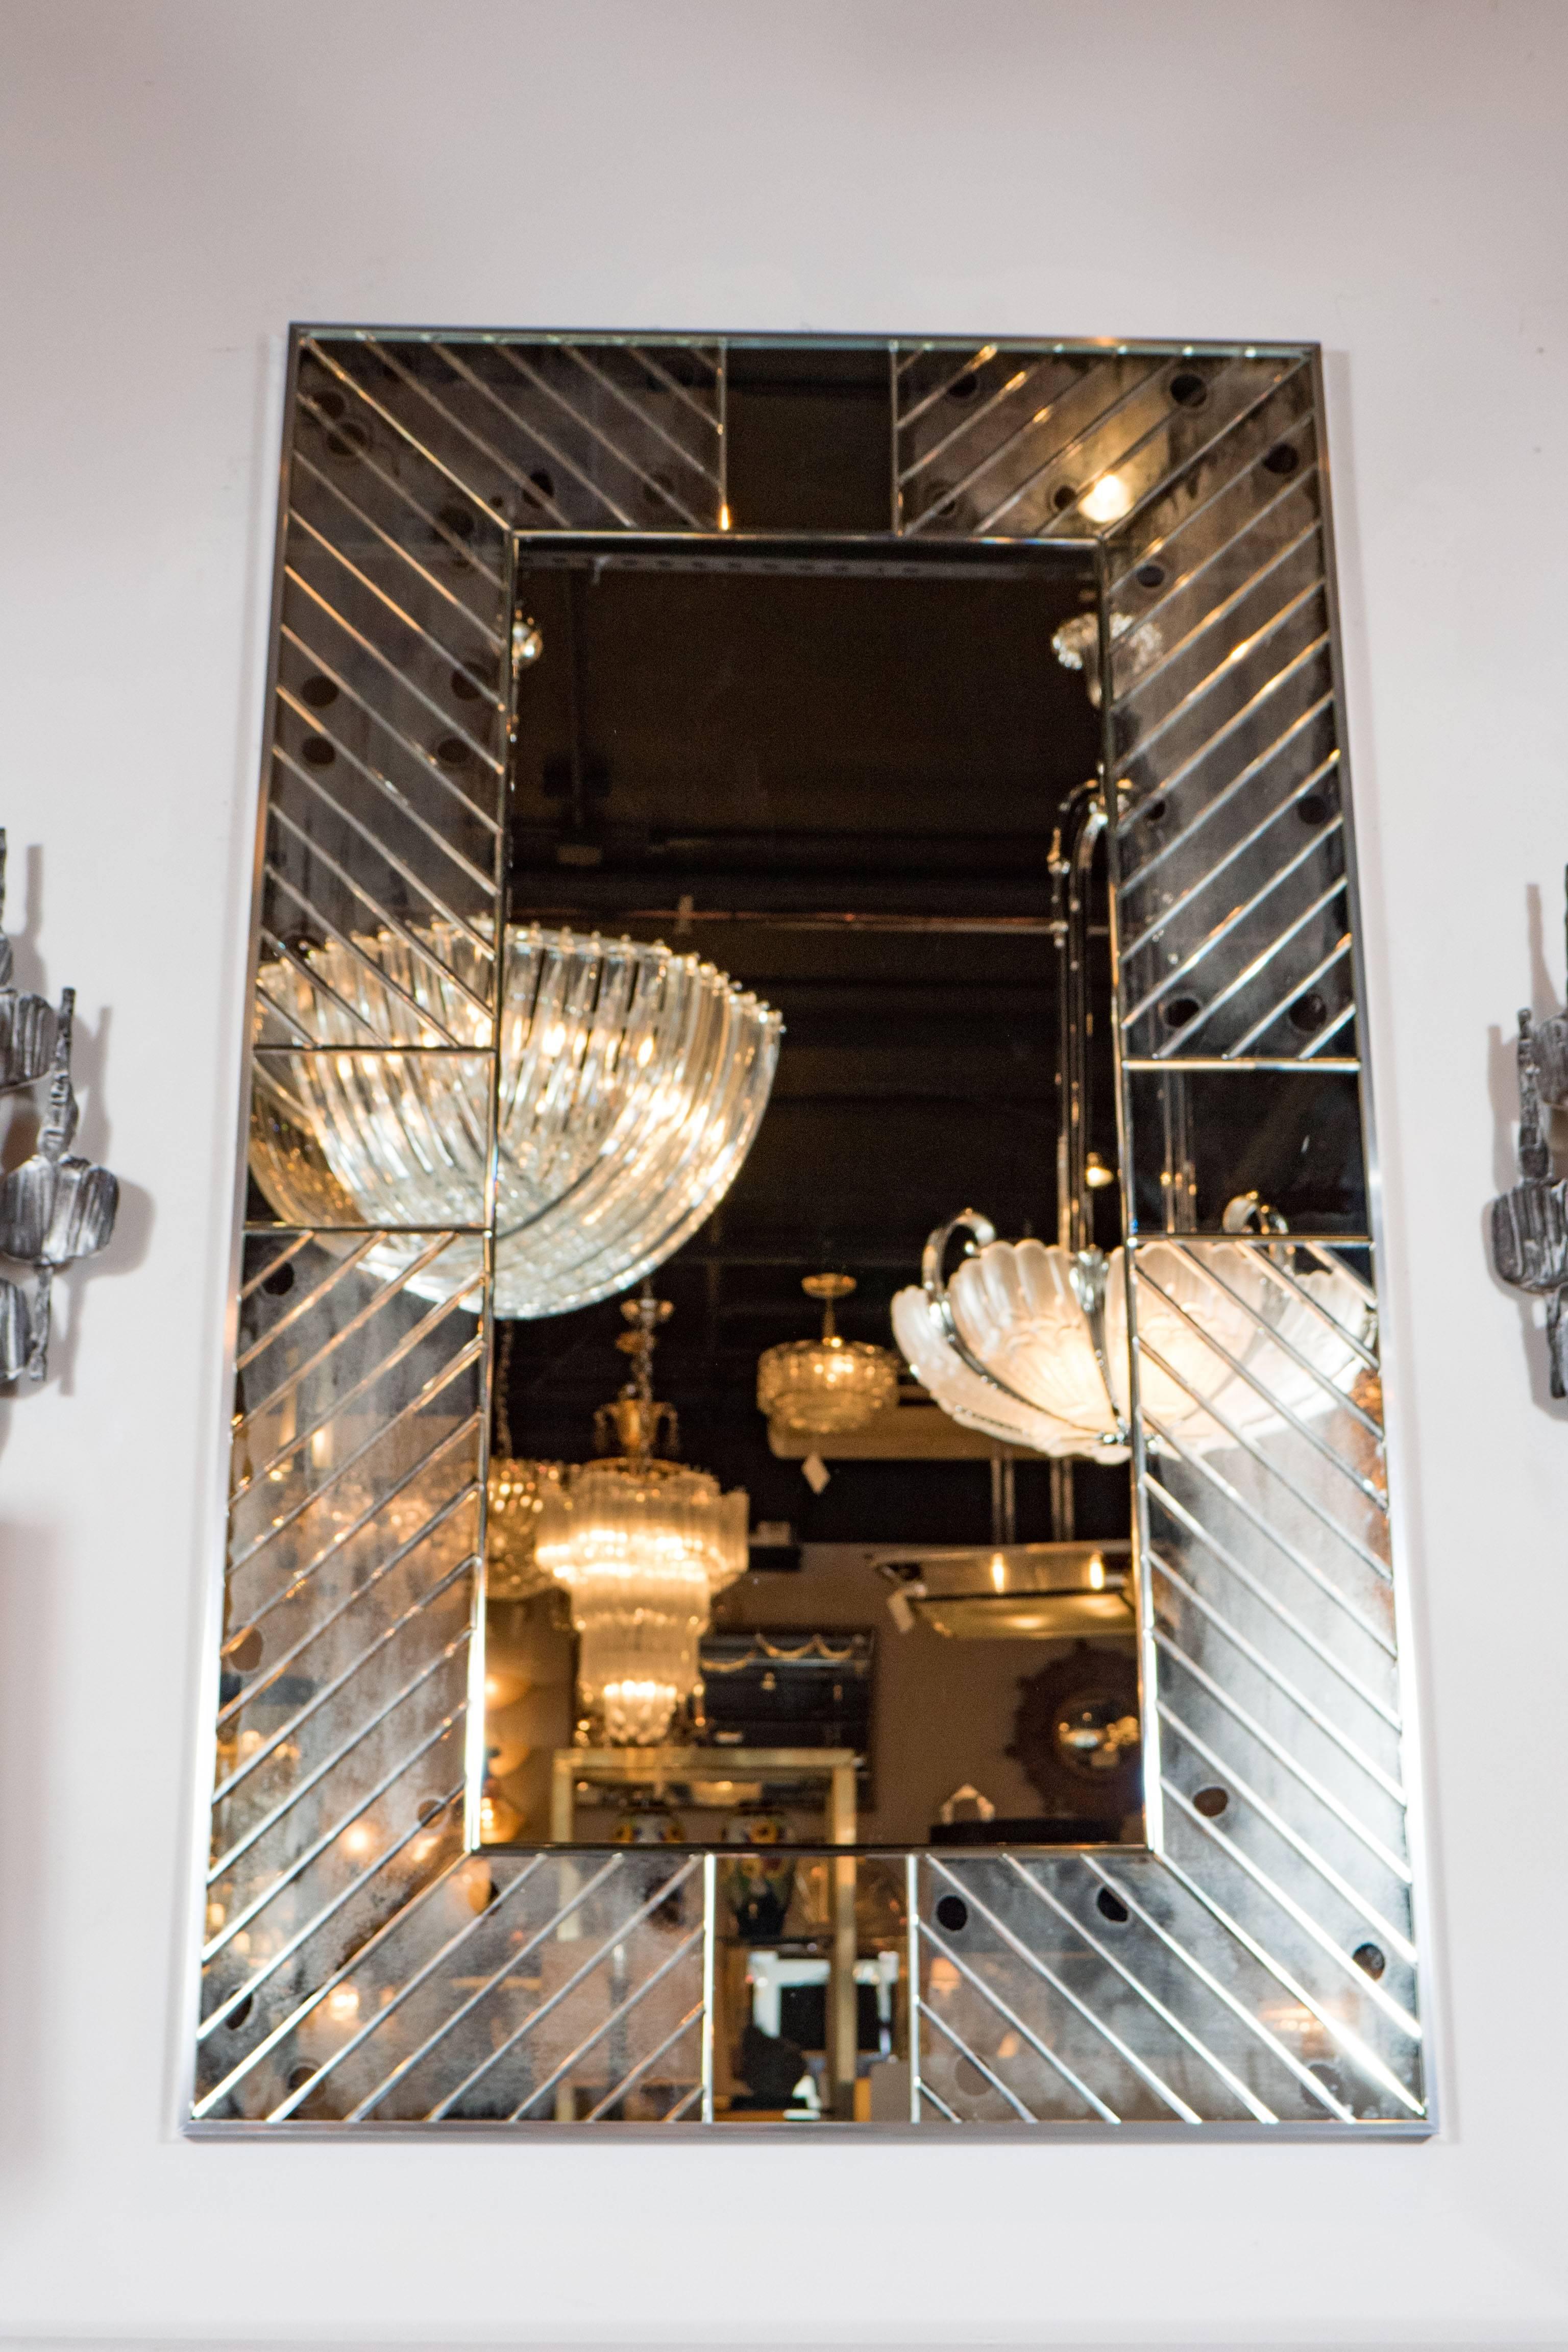 A stunning Tommi Parzinger Originals Model #208 segmented mirror in diagonal patterned glass. A central portion of rectangular mirrored glass is framed by symmetrical segments of patterned cut glass. Each piece is hand-beveled. Exquisite